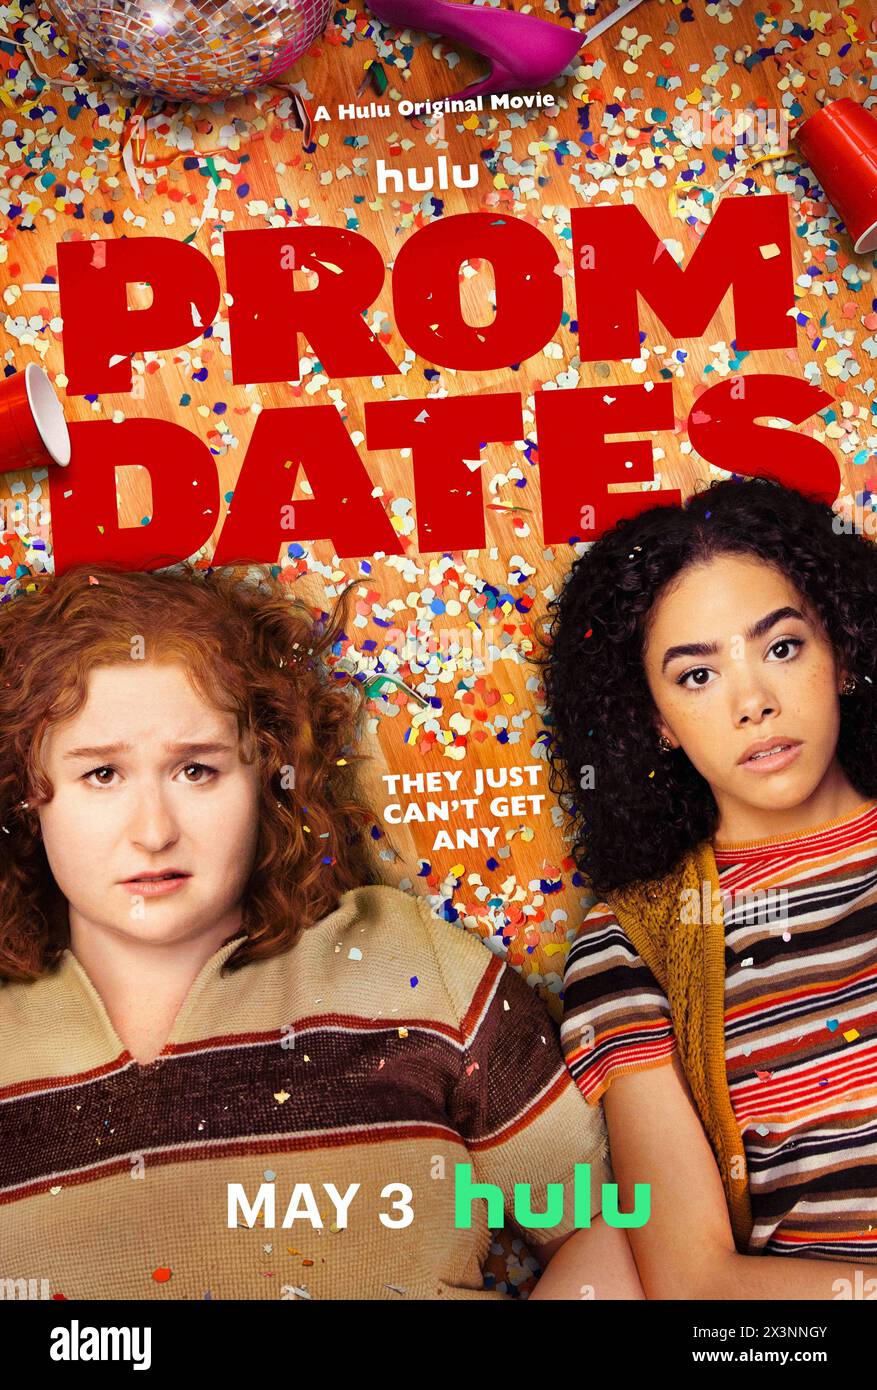 Prom Dates (2024) directed by Kim O. Nguyen and starring Patty Guggenheim, John Michael Higgins and Chelsea Handler. Jess and Hannah, at 13 years old made a pact to have the perfect prom, only 24 hours before the big event, everything is ruined when they break up with their dates. Now they have one night to find new dates and make the fantasy comes true. US one sheet poster.***EDITORIAL USE ONLY*** Credit: BFA / Hulu Stock Photo